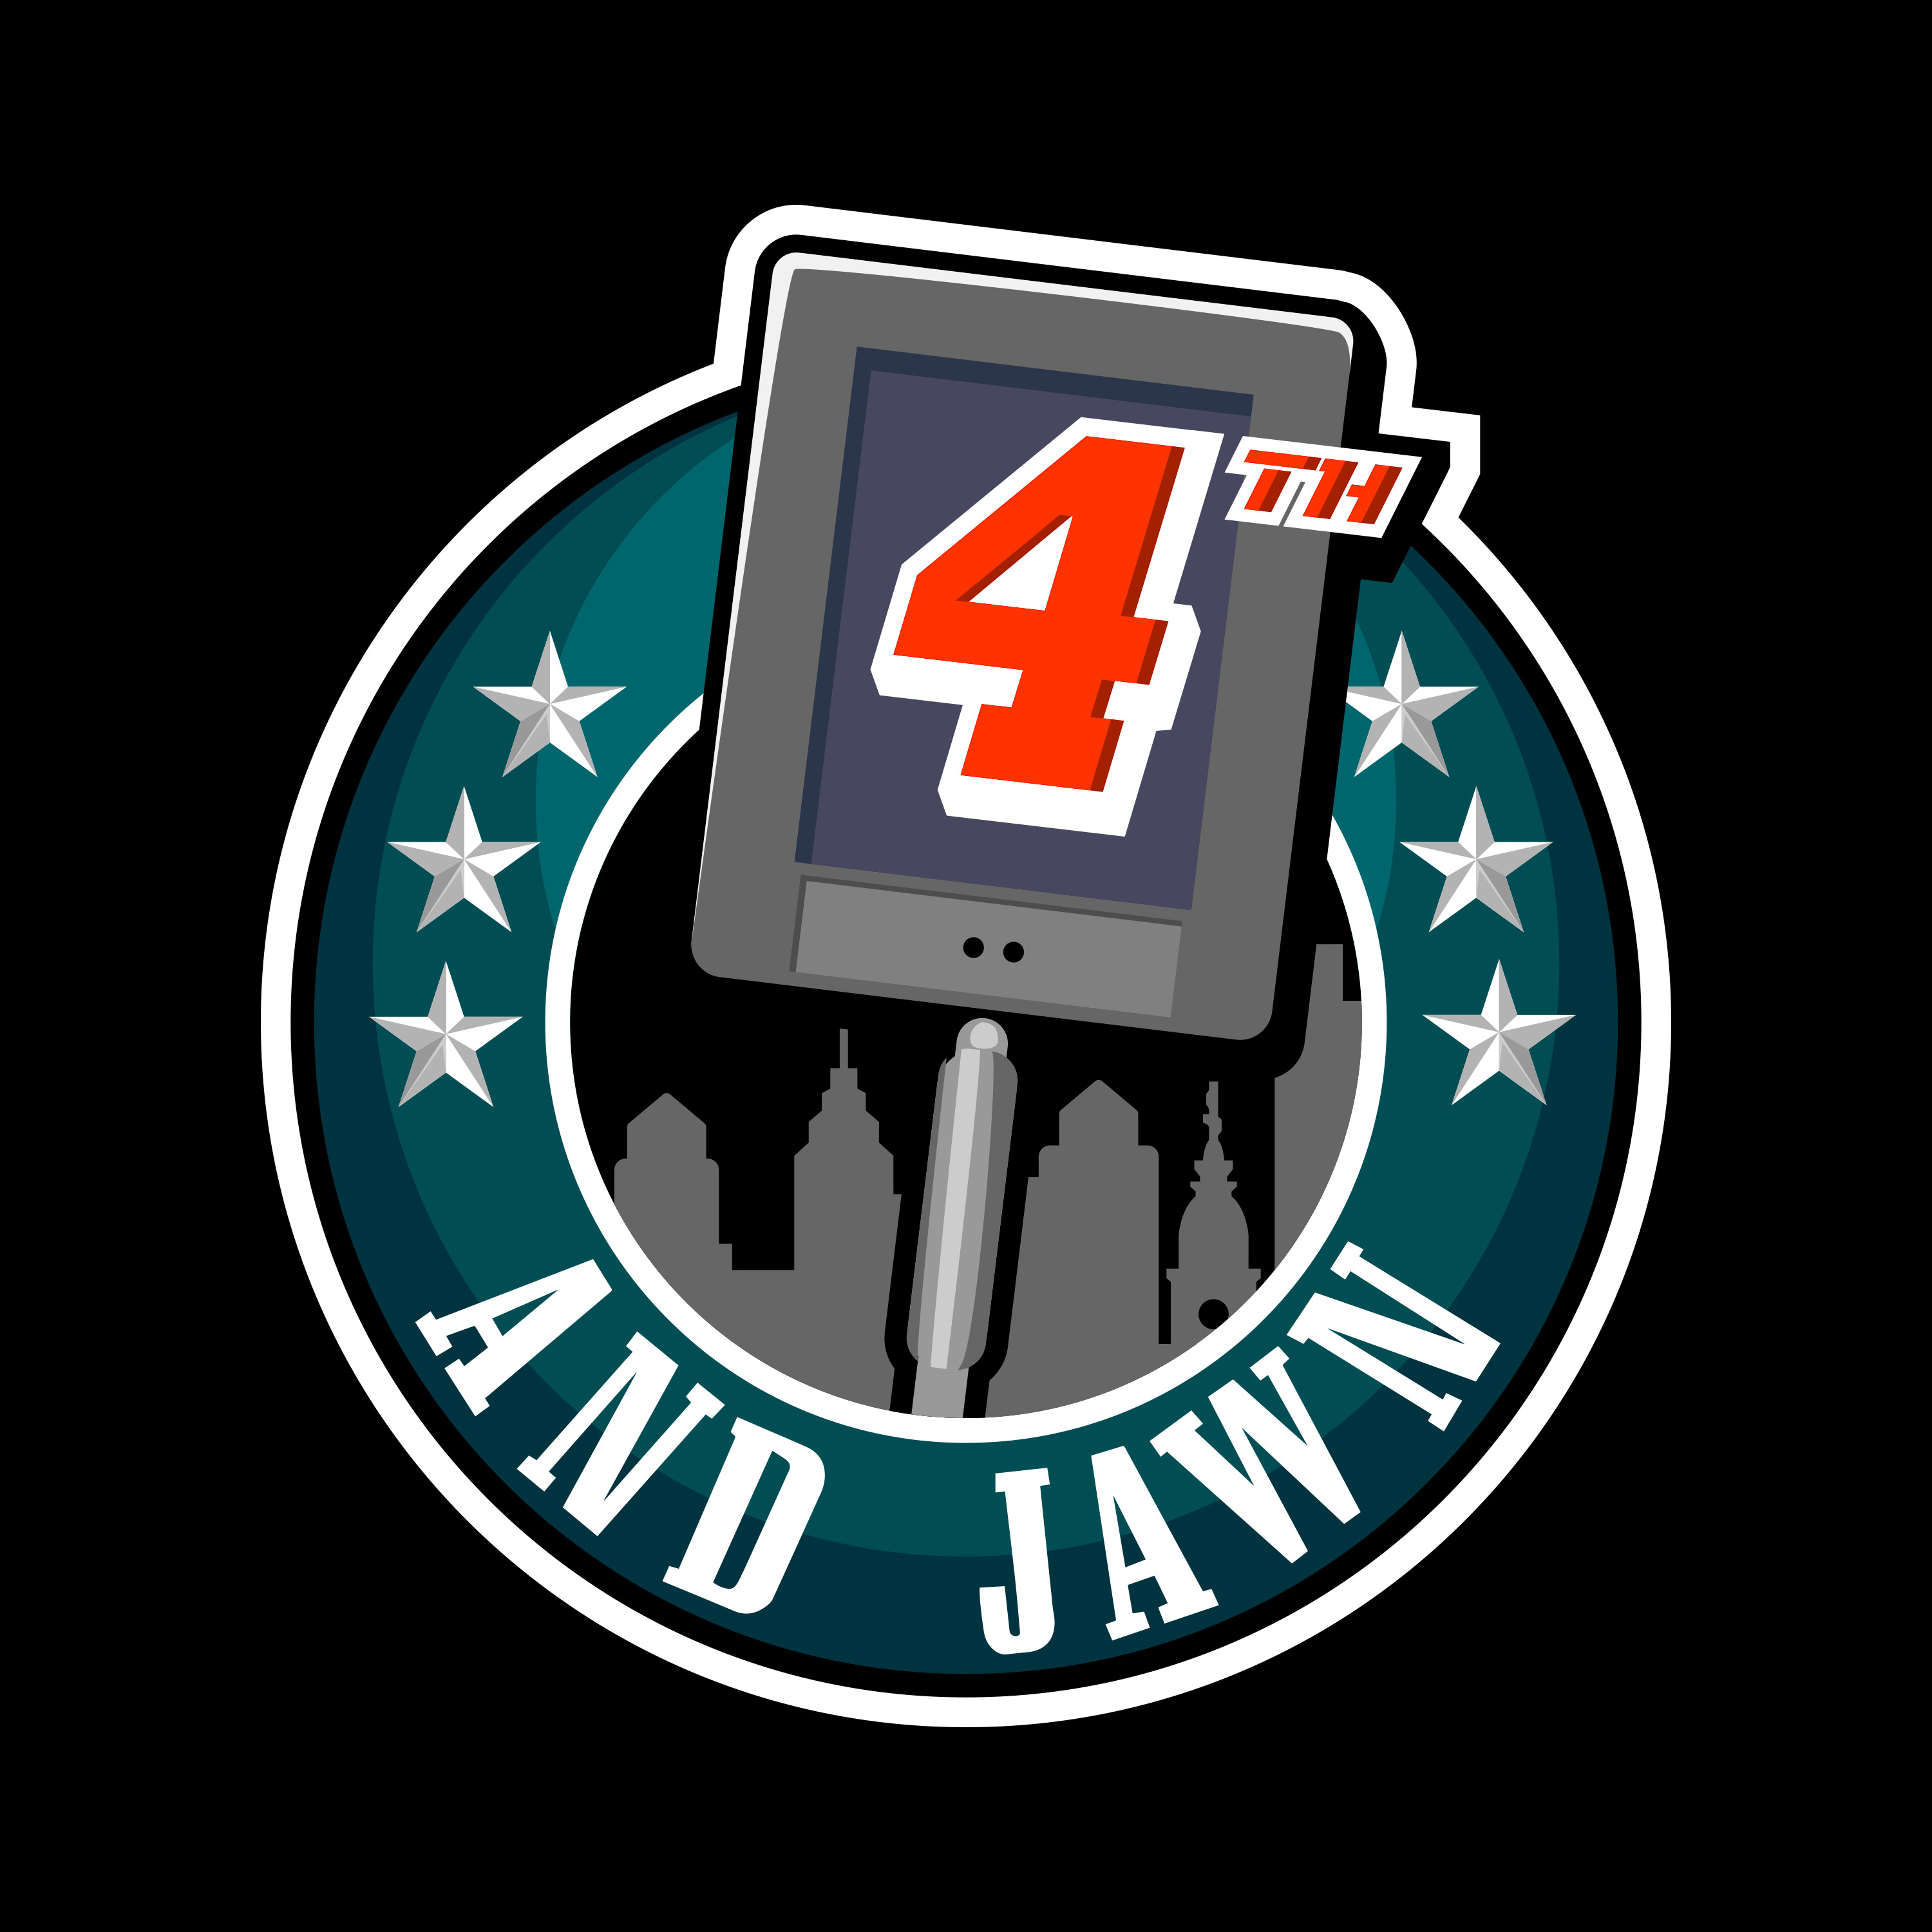 4th and Jawn - Episode 370 - Eagles Browns Recap Training camp news and notes